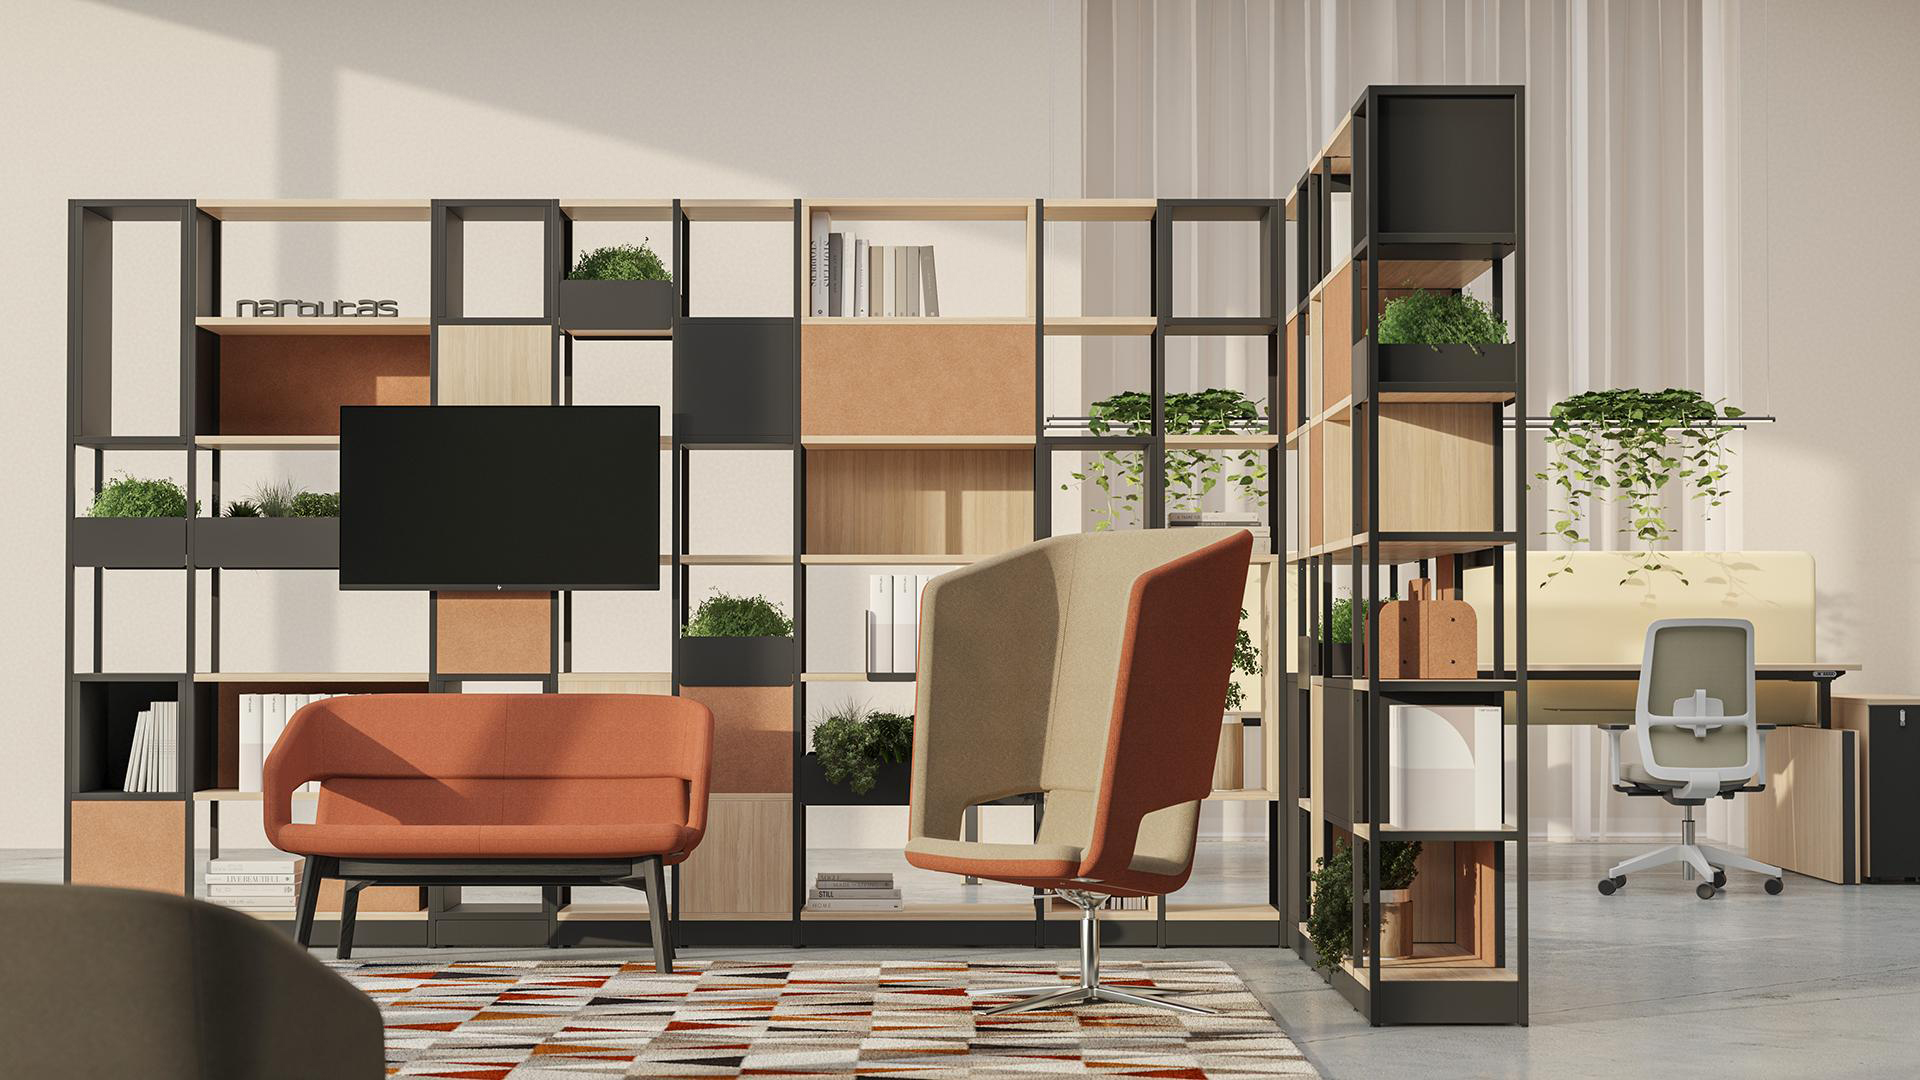 Create breakout areas within open plan offices with zoning storage shelves